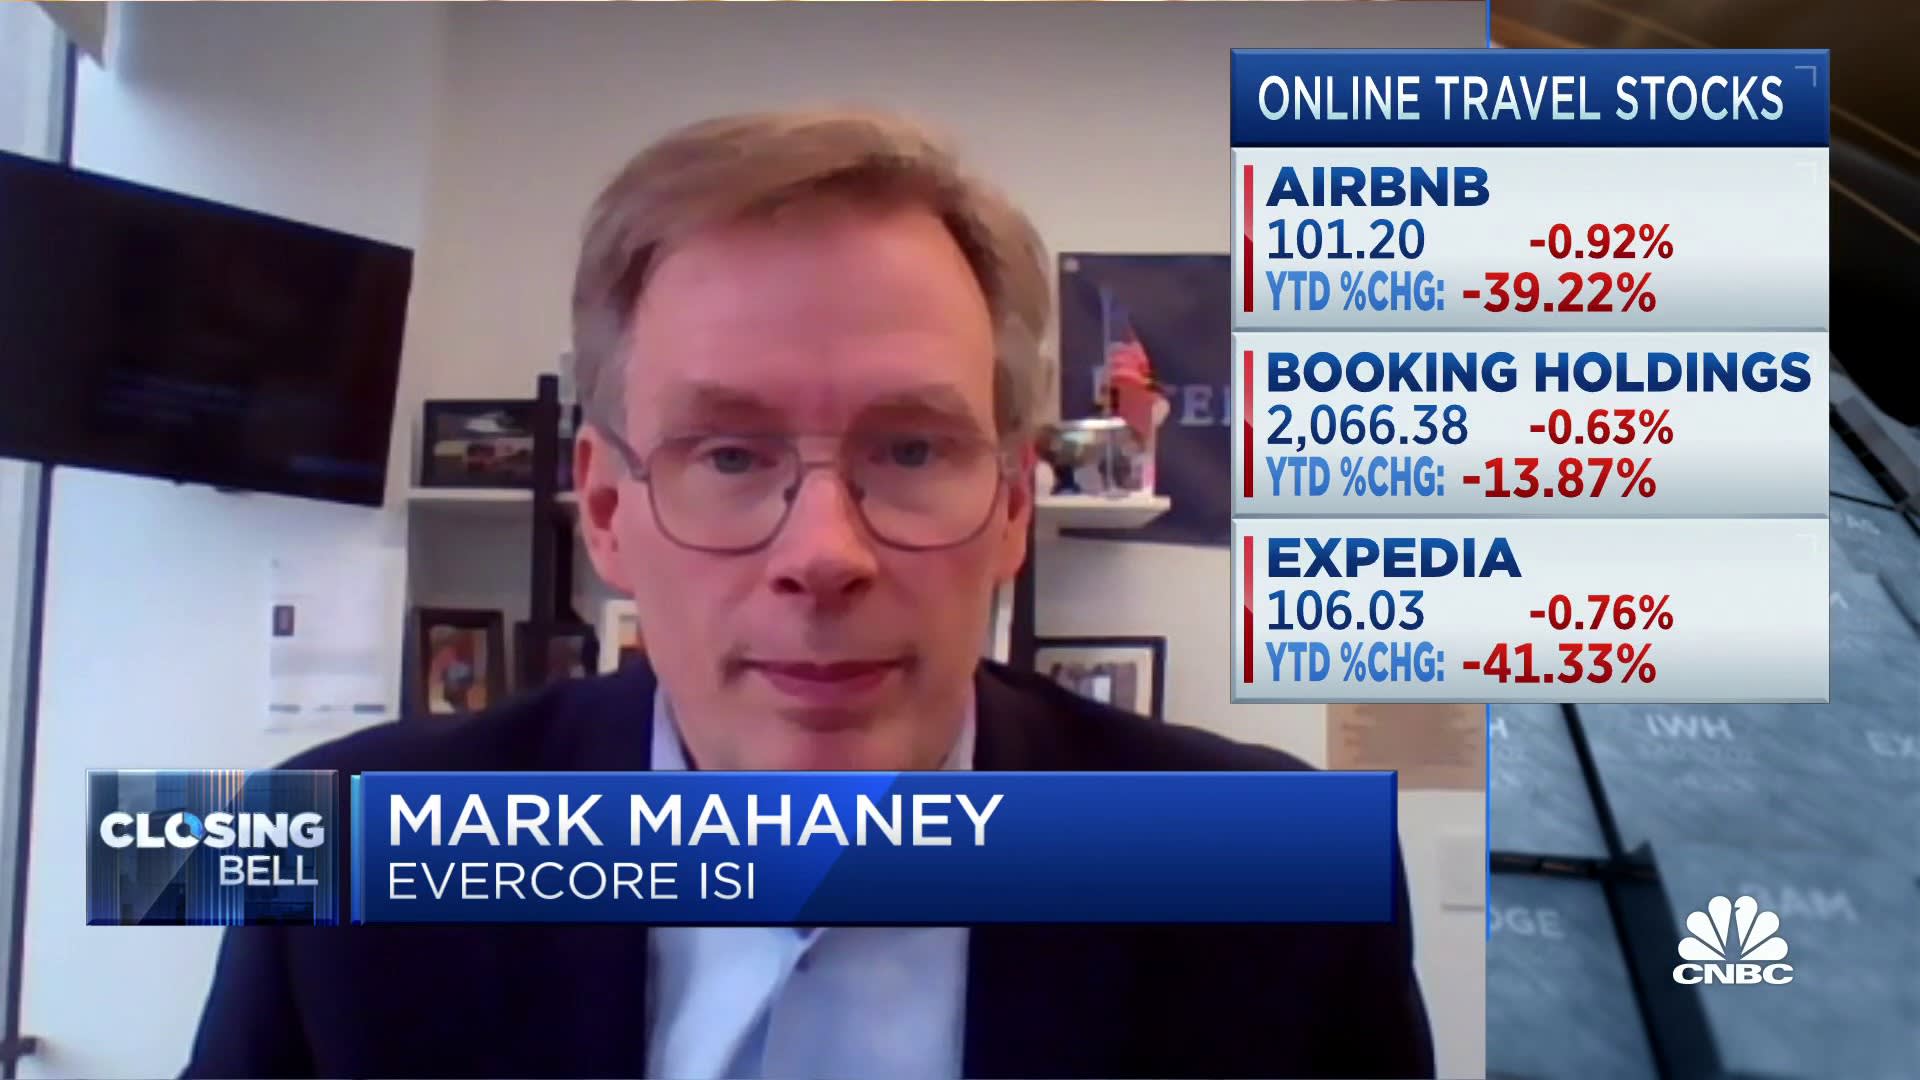 Vacation corporations reducing prices early can make them desirable, states Evercore’s Mark Mahaney